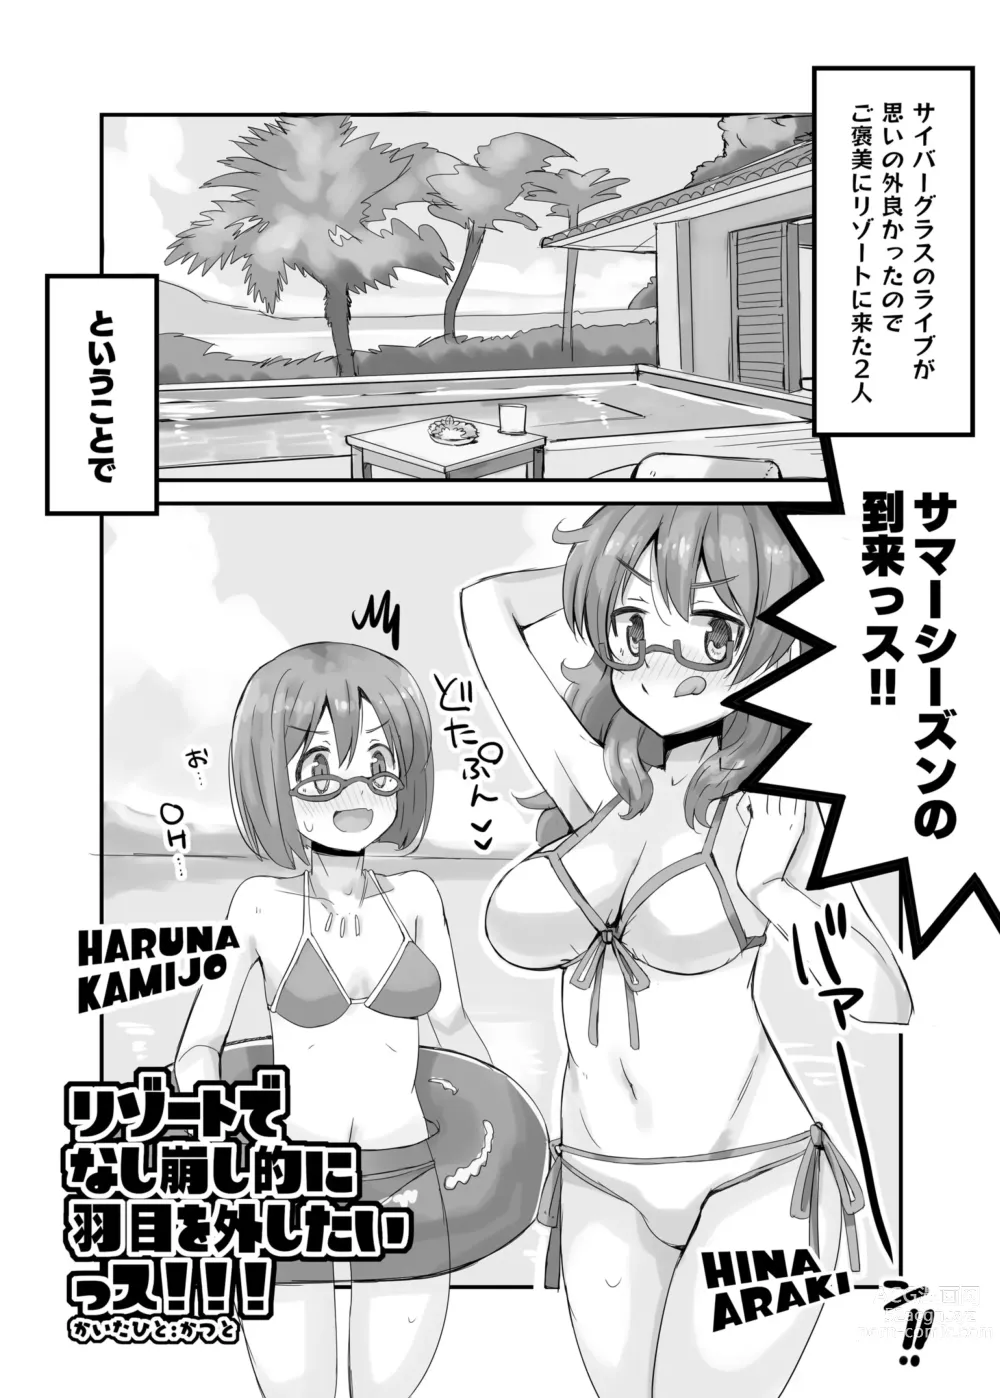 Page 4 of doujinshi HINA RESORT MIX! - Its a story about two idols going wild and eating producers at a resort.